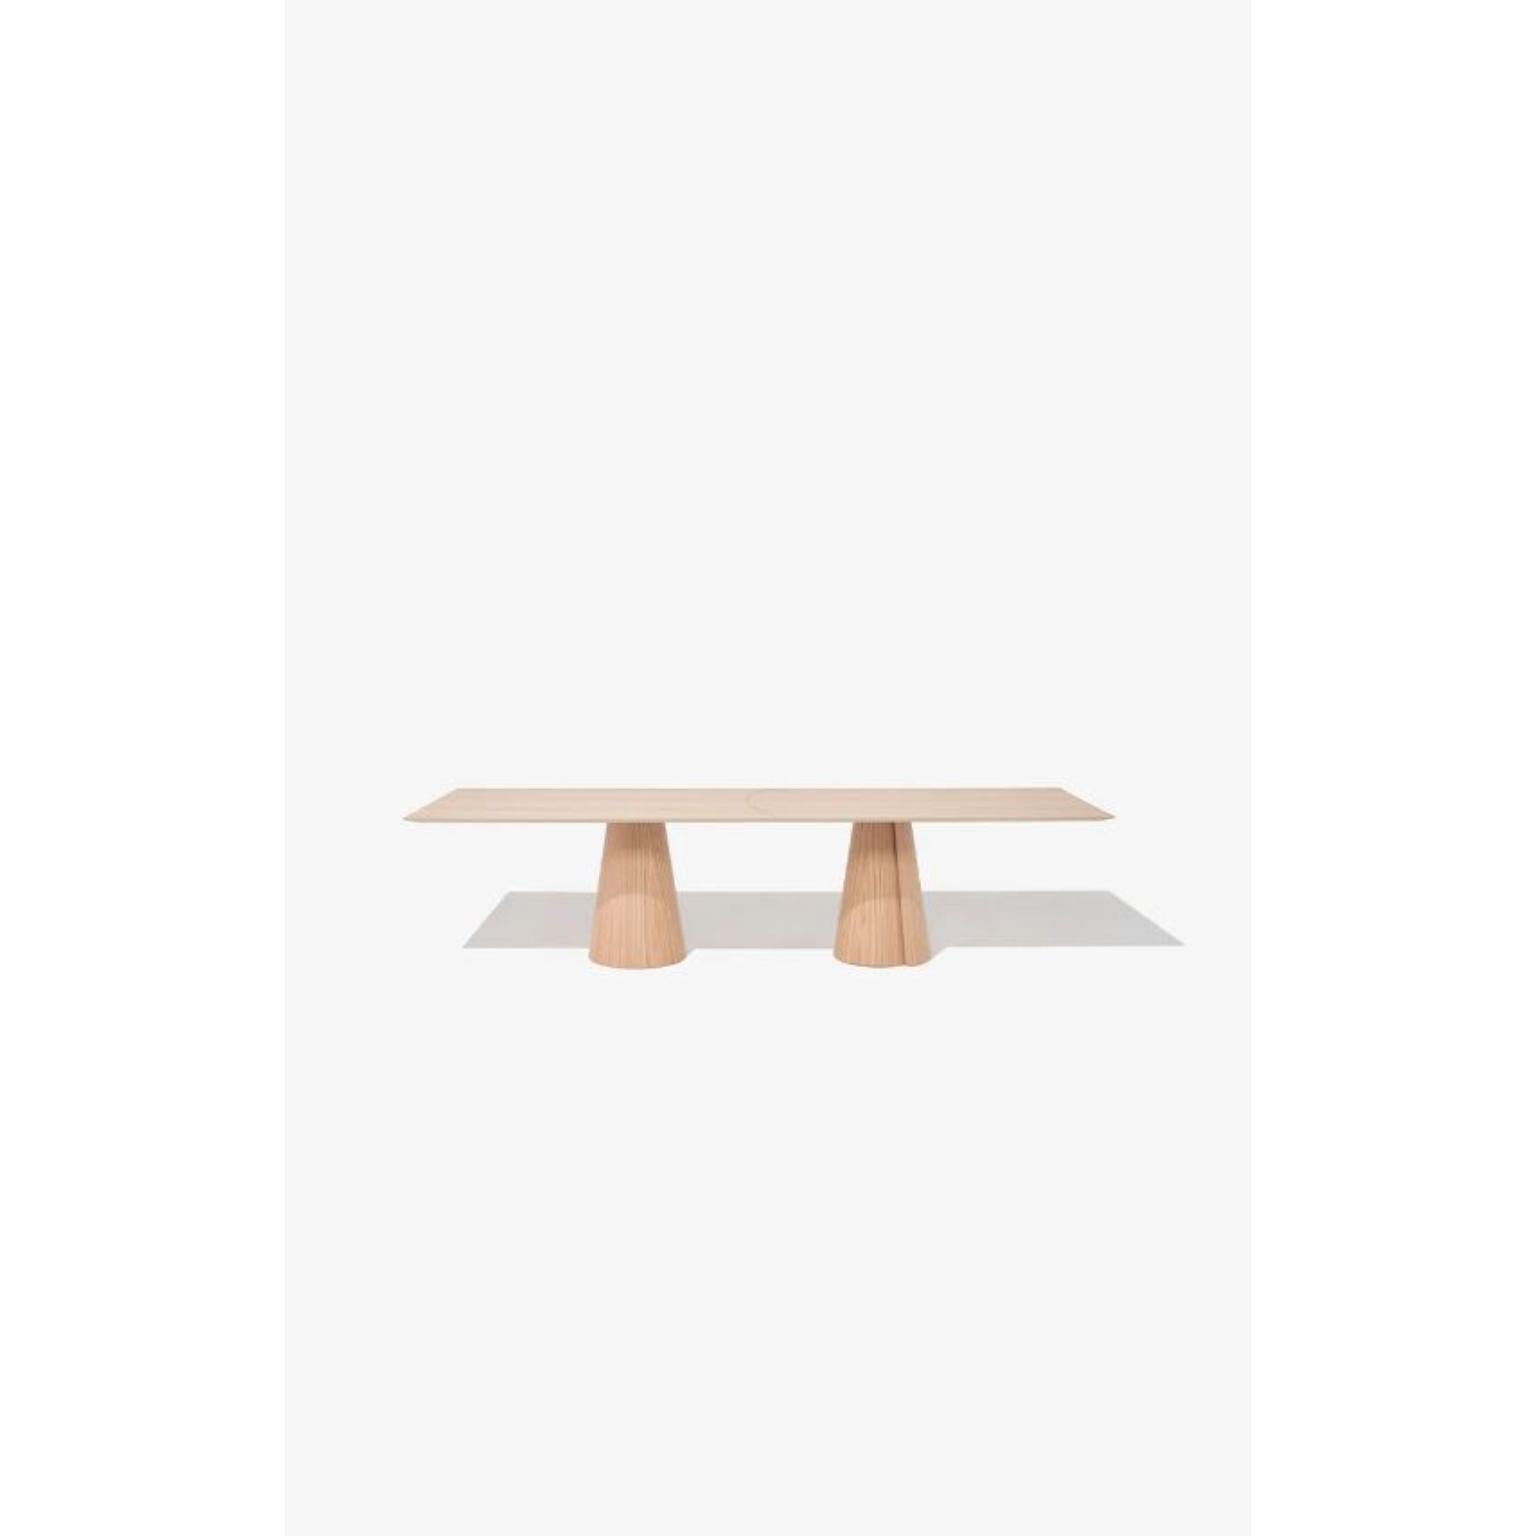 320 Volta Rectangular Dining Table by Wentz
Dimensions: D 120 x W 320 x H 75 cm
Materials: Wood, Plywood, MDF, Natural Wood Veneer, Steel.
Also available in different colors: Oak, Walnut, Black, White, Leaf Green.

The Volta table references nature